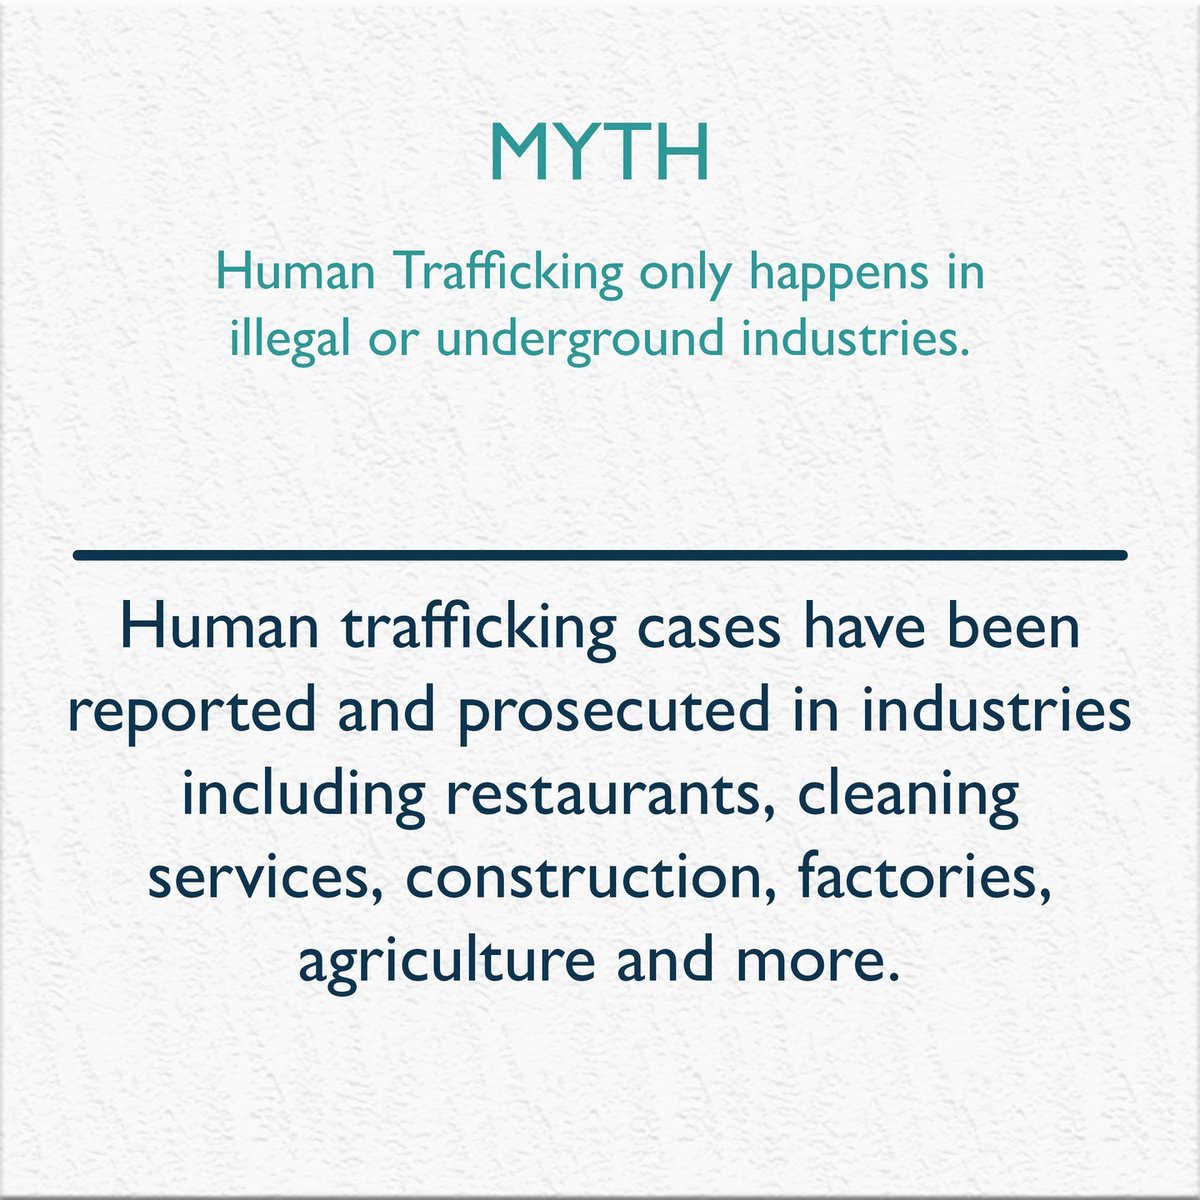 While Human Trafficking is difficult to locate due to its hidden nature, that DOESN'T mean it only happens in illegal industries.